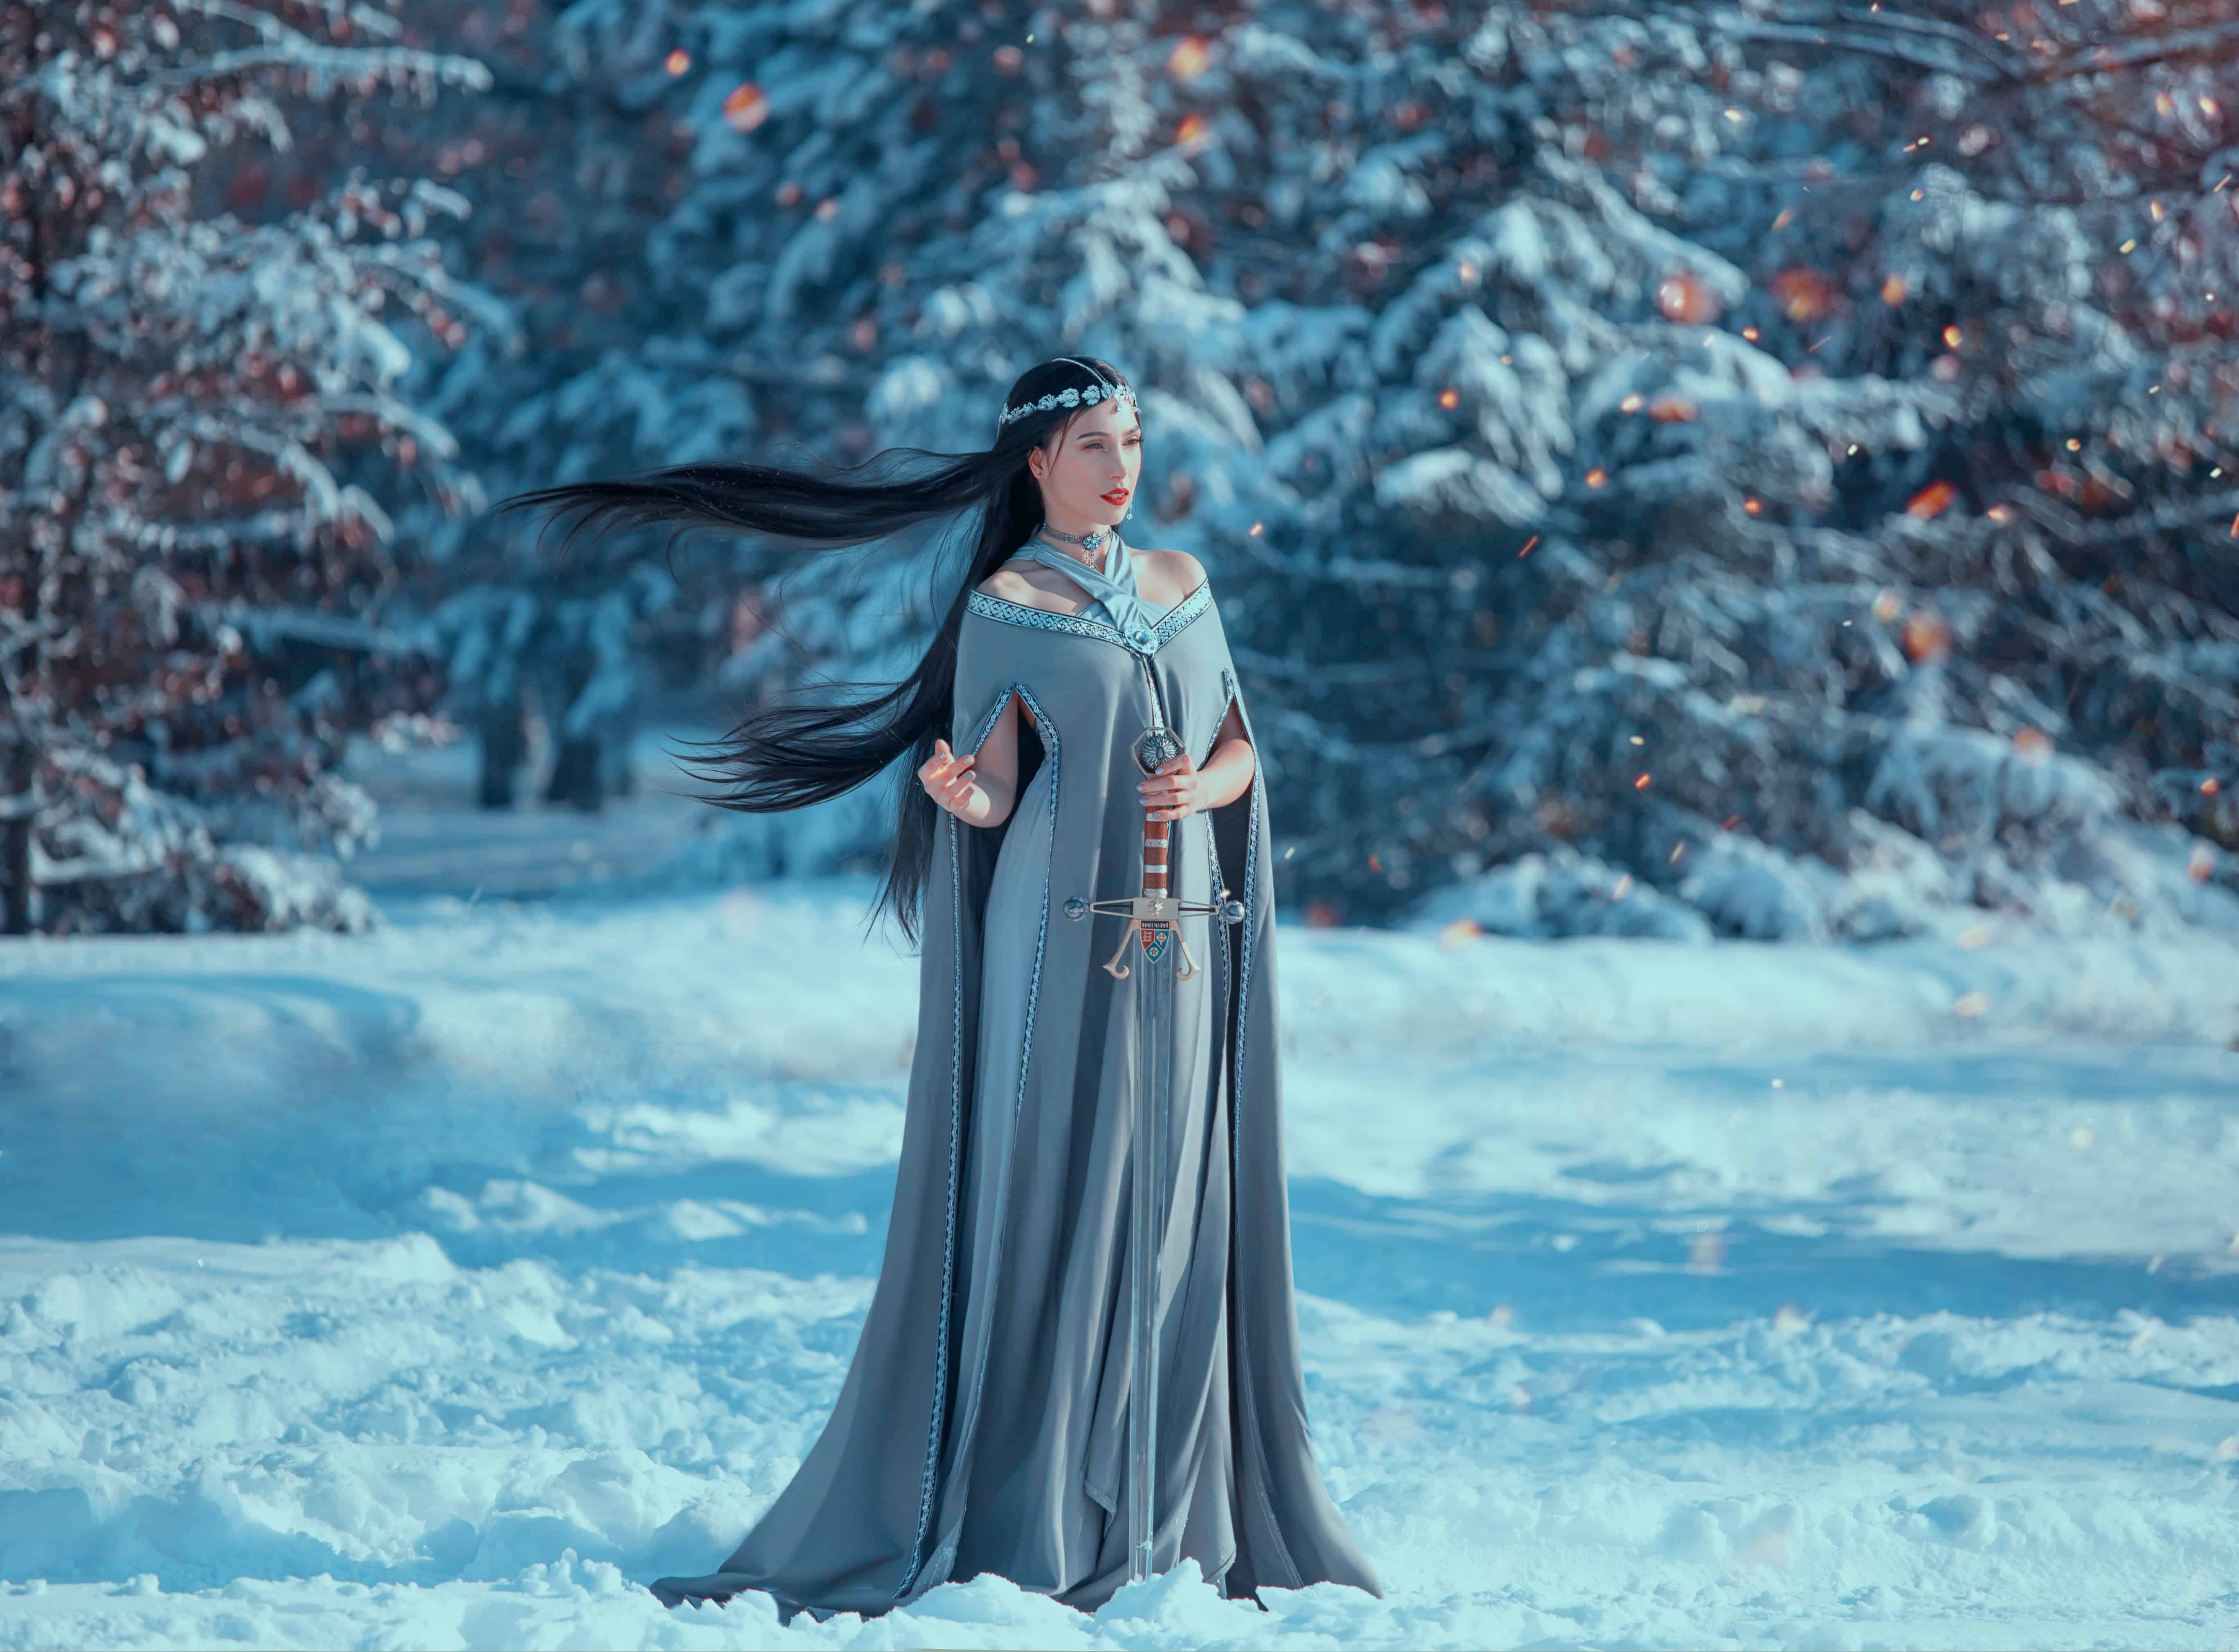 charming attractive lady in snowy forest, militant elf princess with black long flying hair holds sword, loose gray warm dress and raincoat in sparks of fire in winter, creative cold blue colors